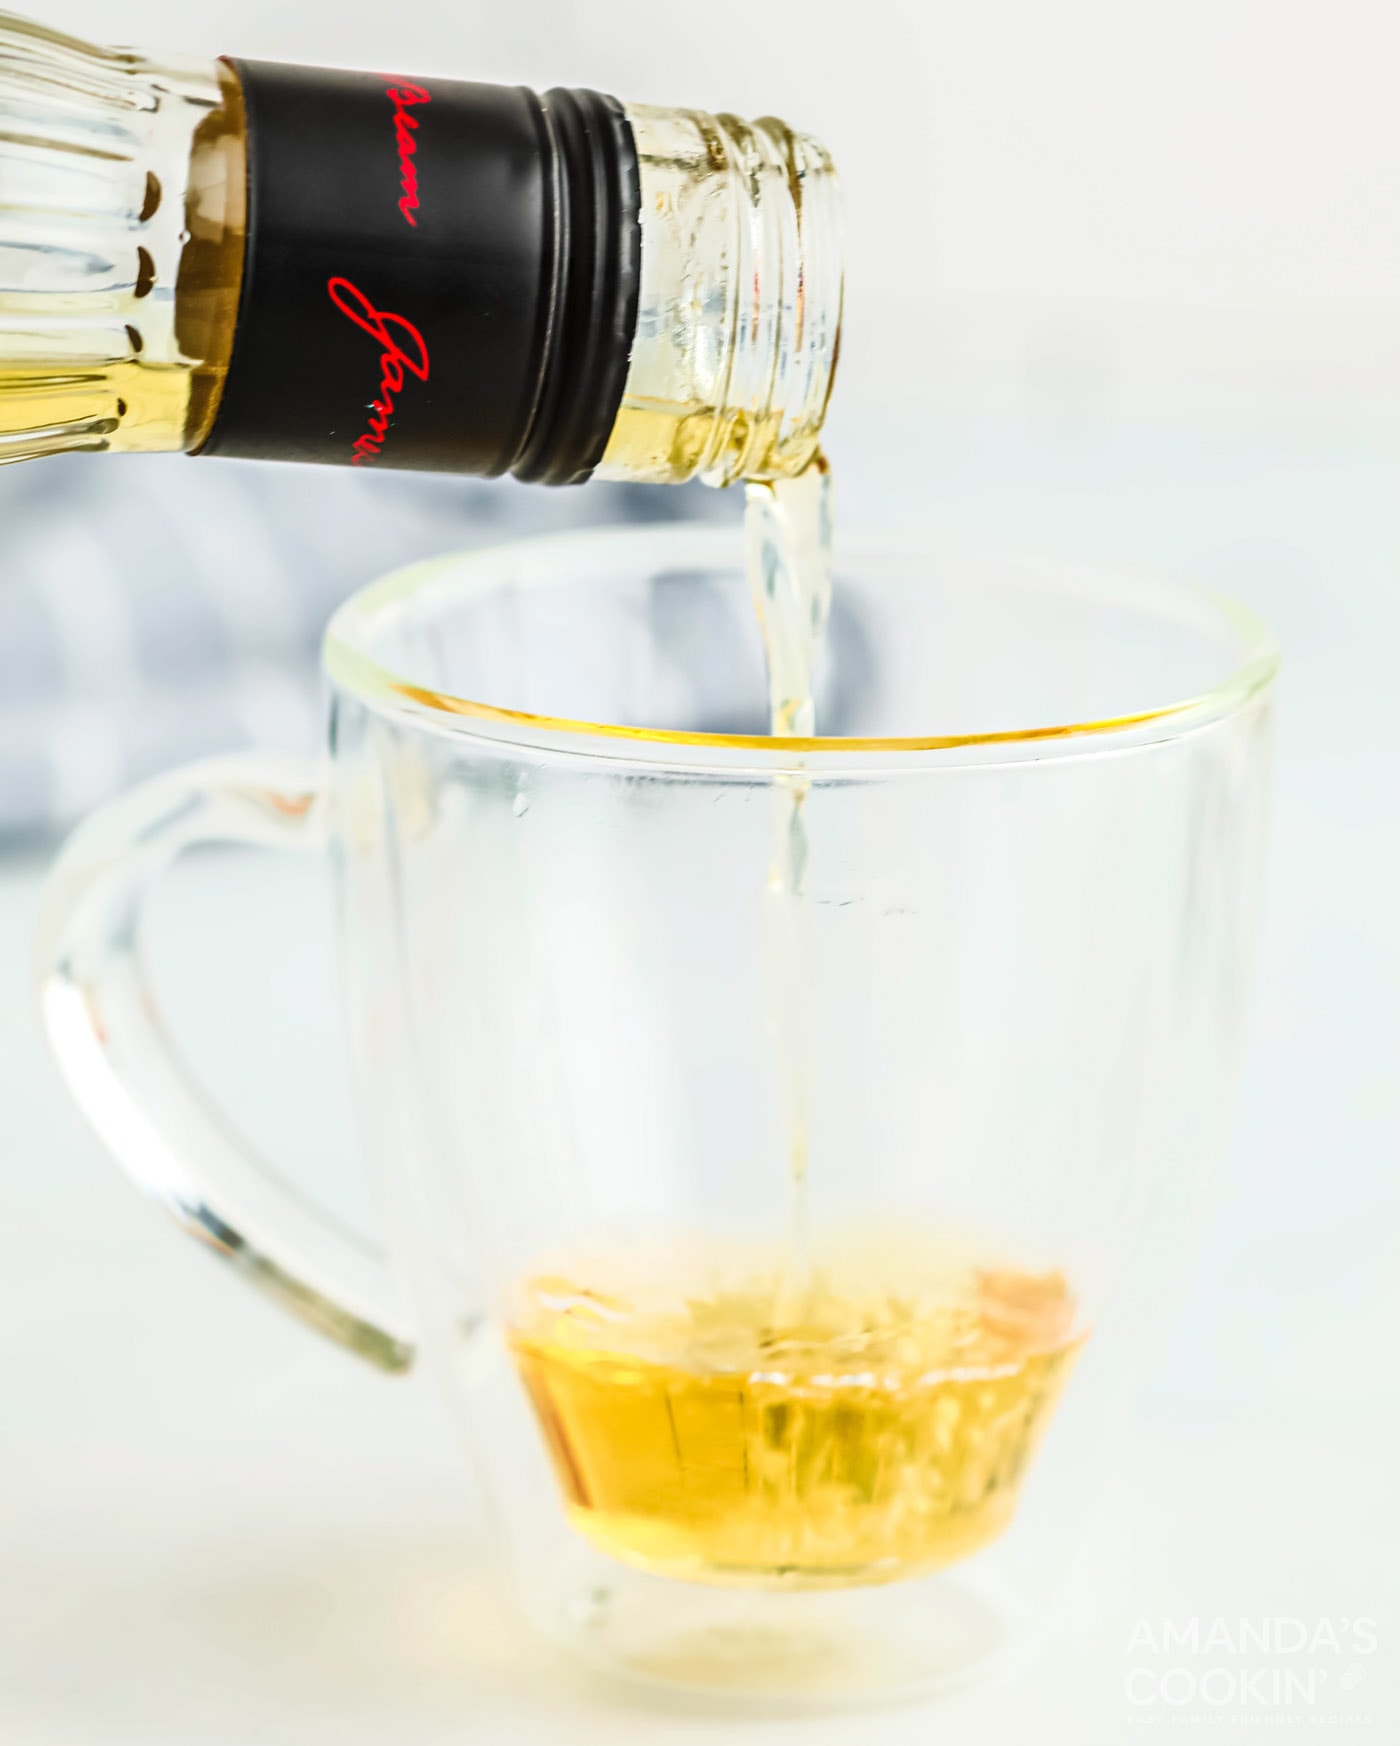 pouring apple whiskey into a mug